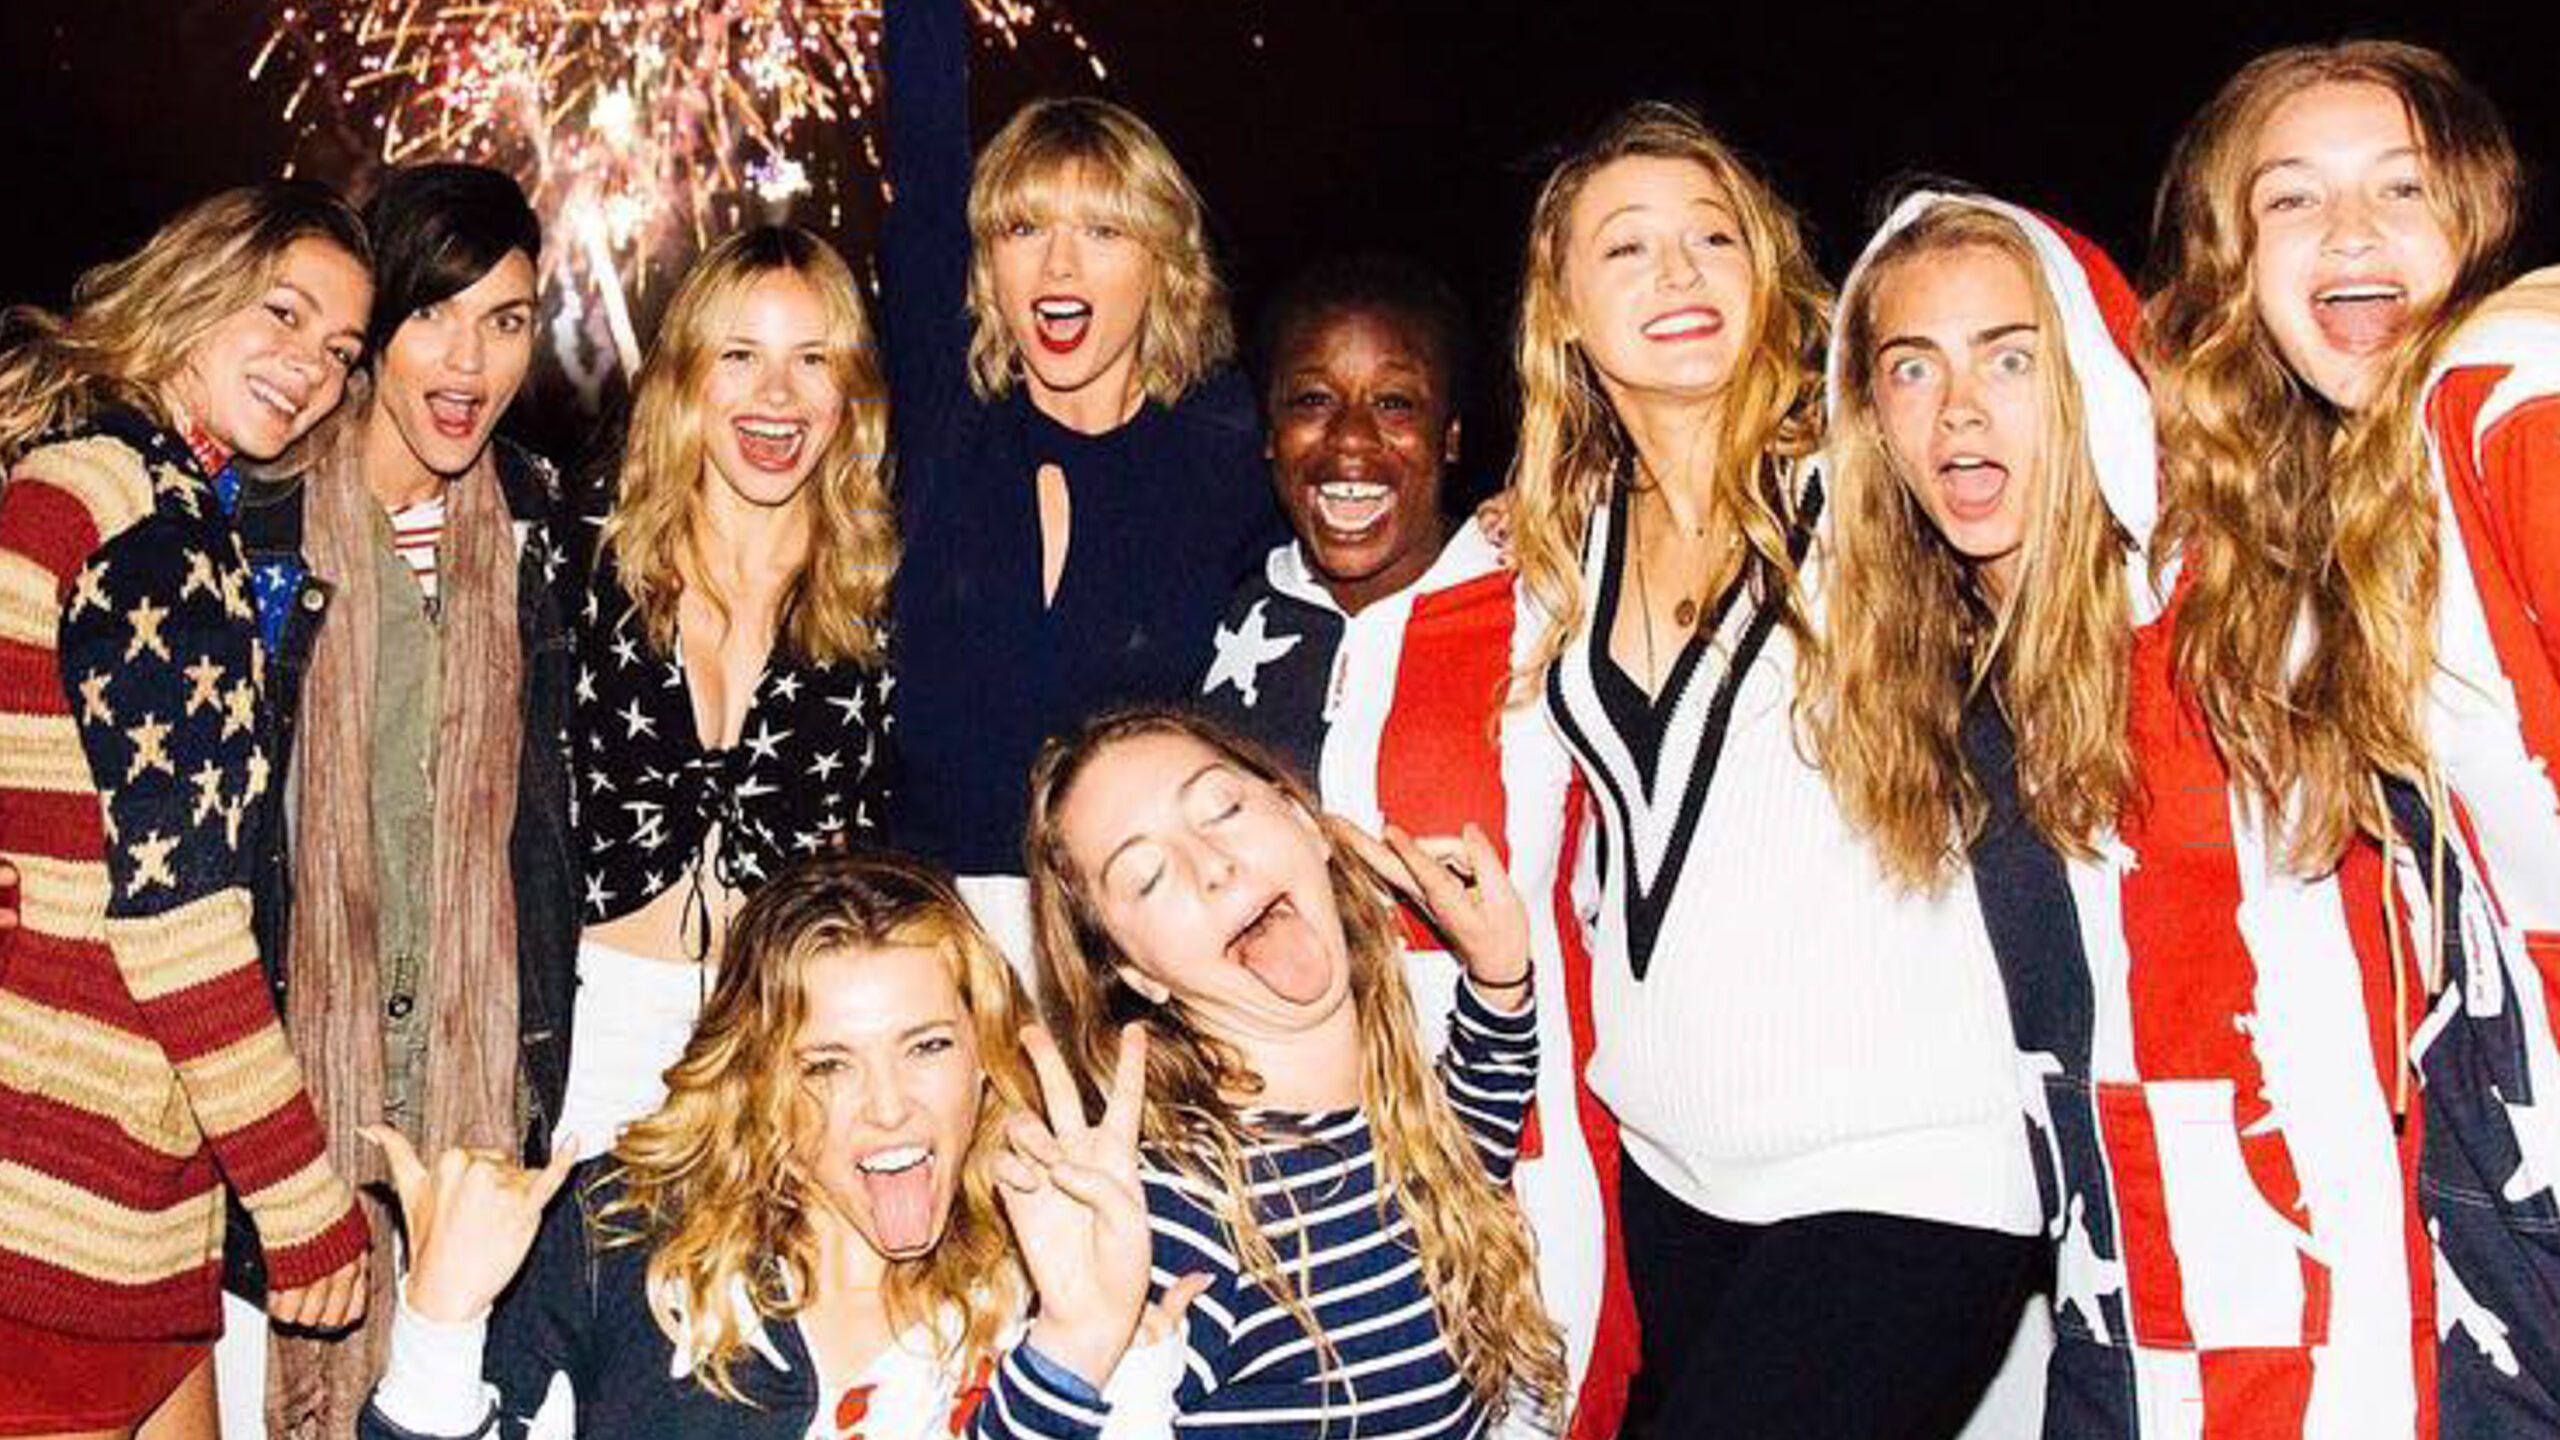 IN PHOTOS: Taylor Swift celebrates 4th of July with Gigi Hadid, Cara Delevingne, more